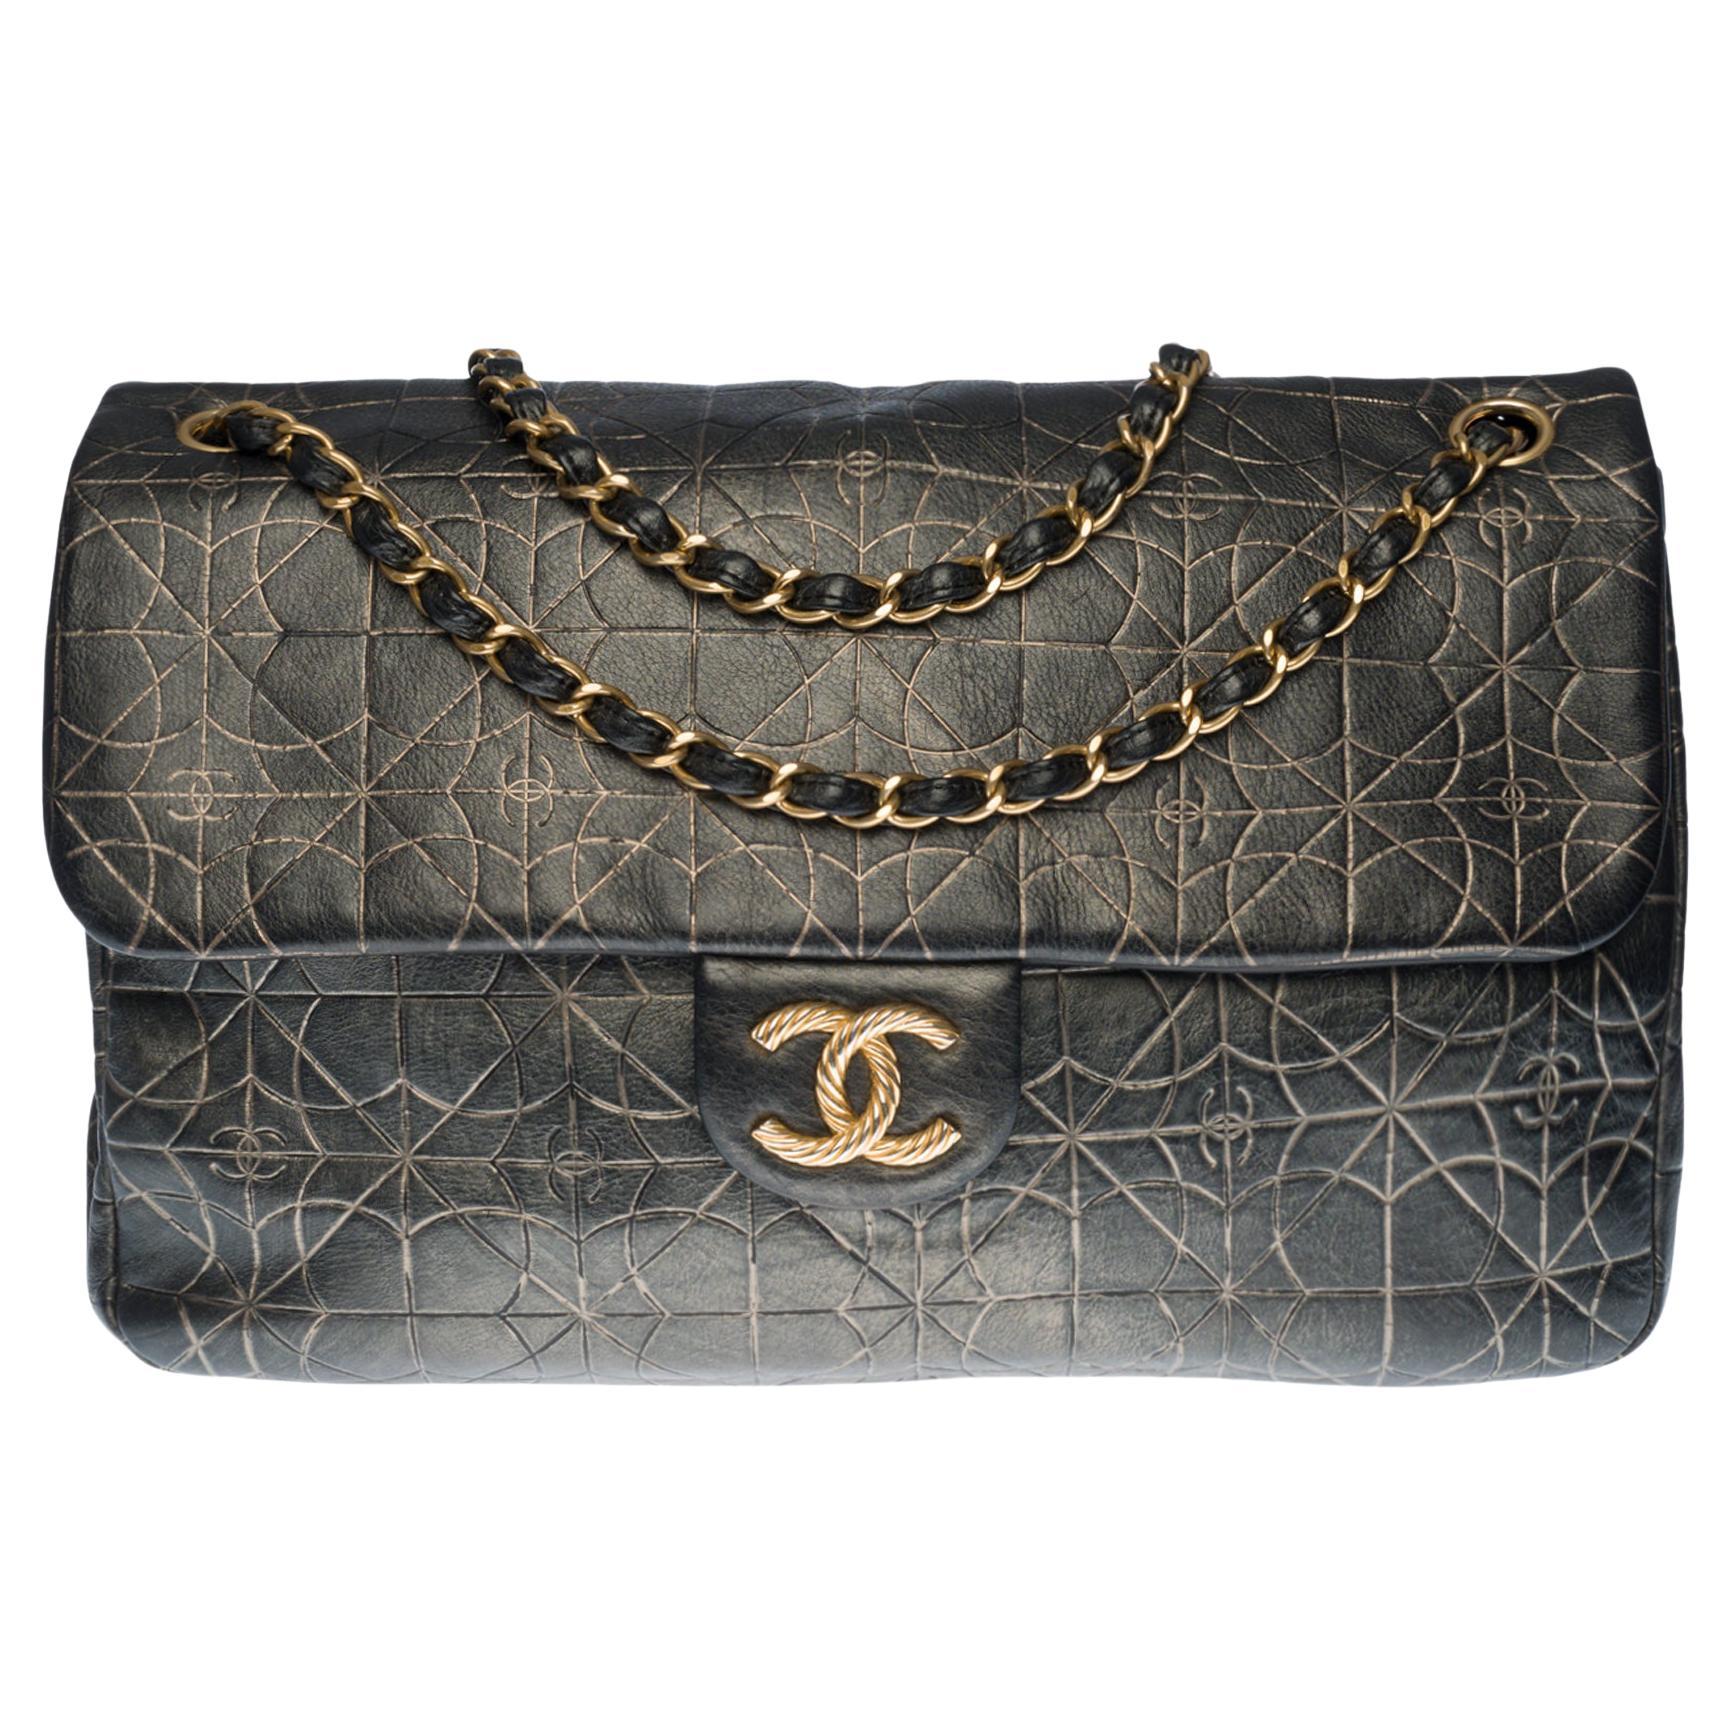 CHANEL timeless double flap bag in gilded leather limited edition